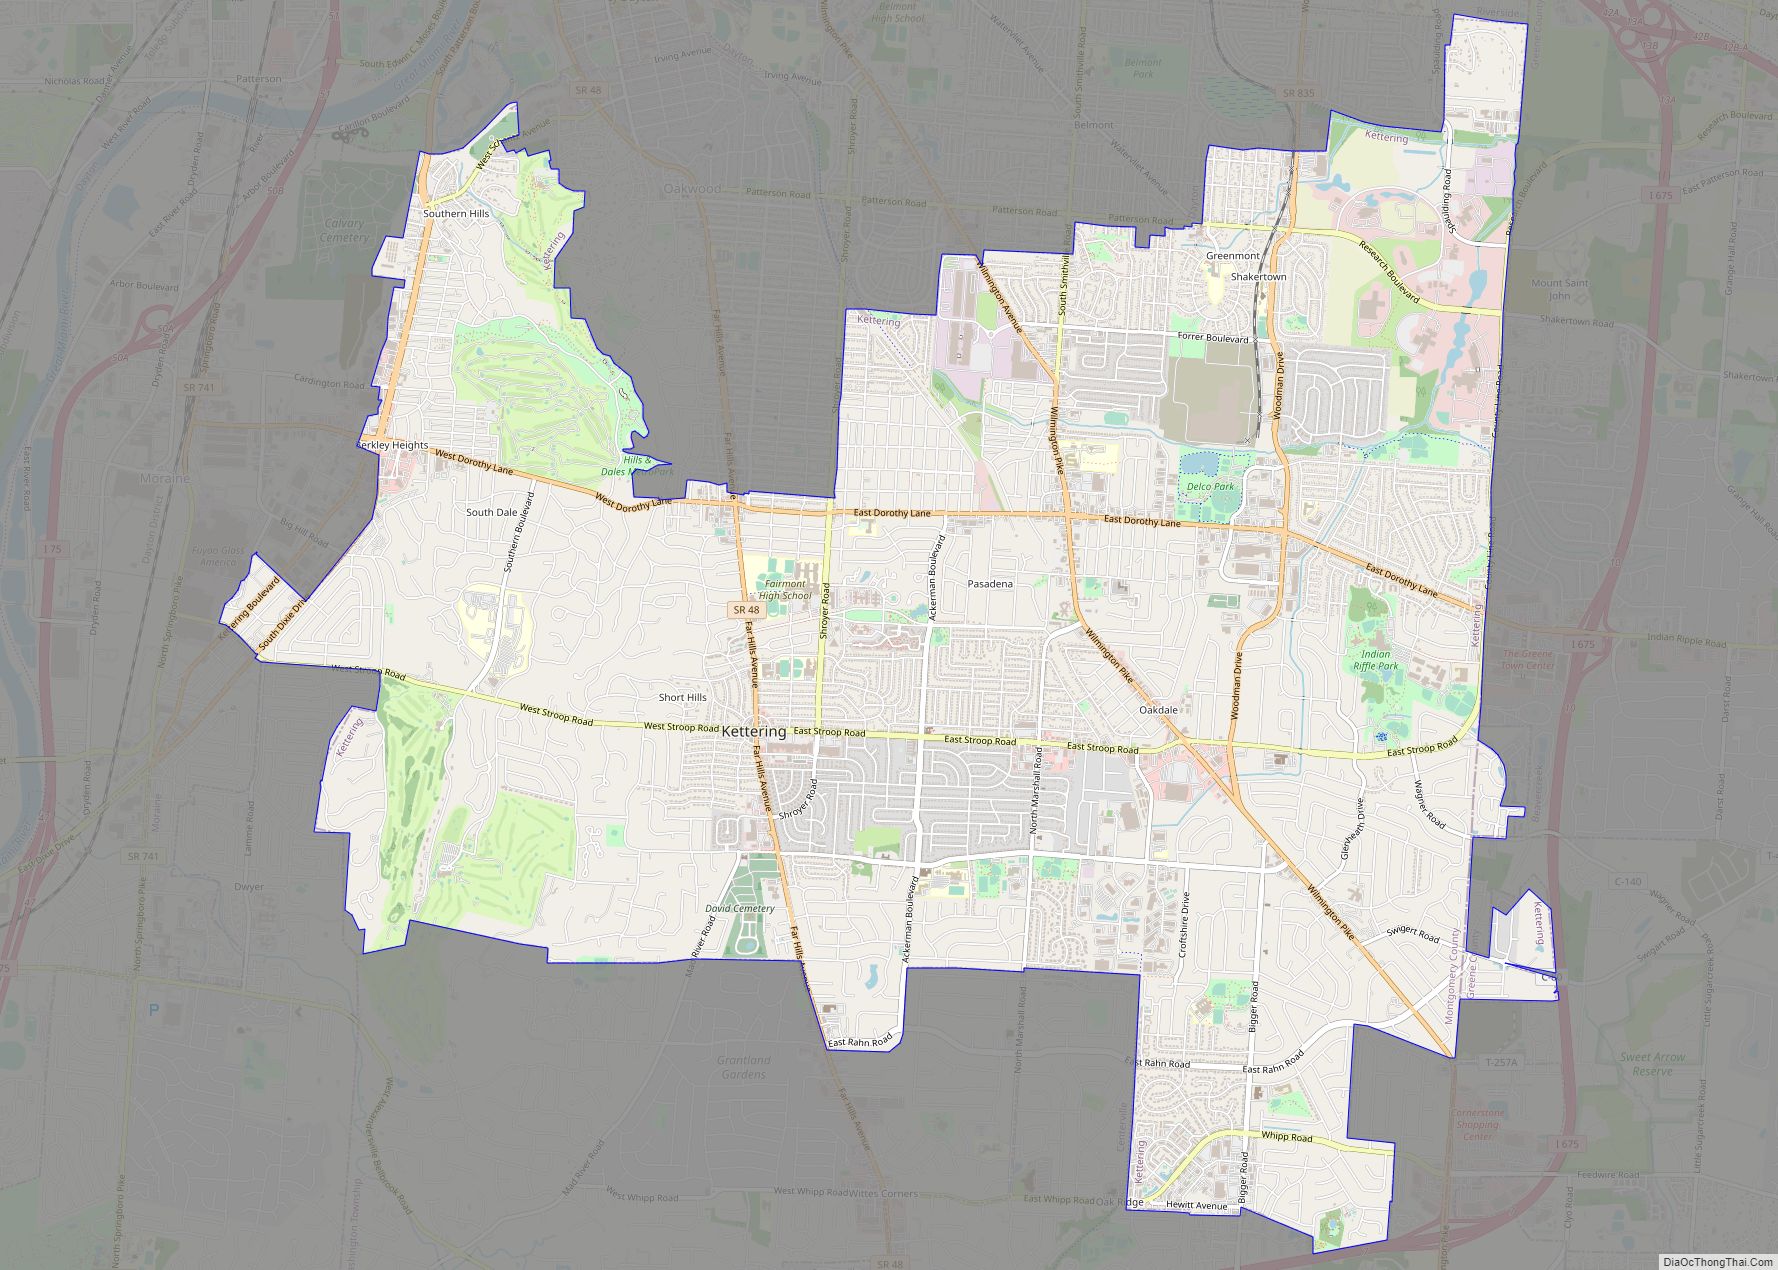 Map of Kettering city, Ohio